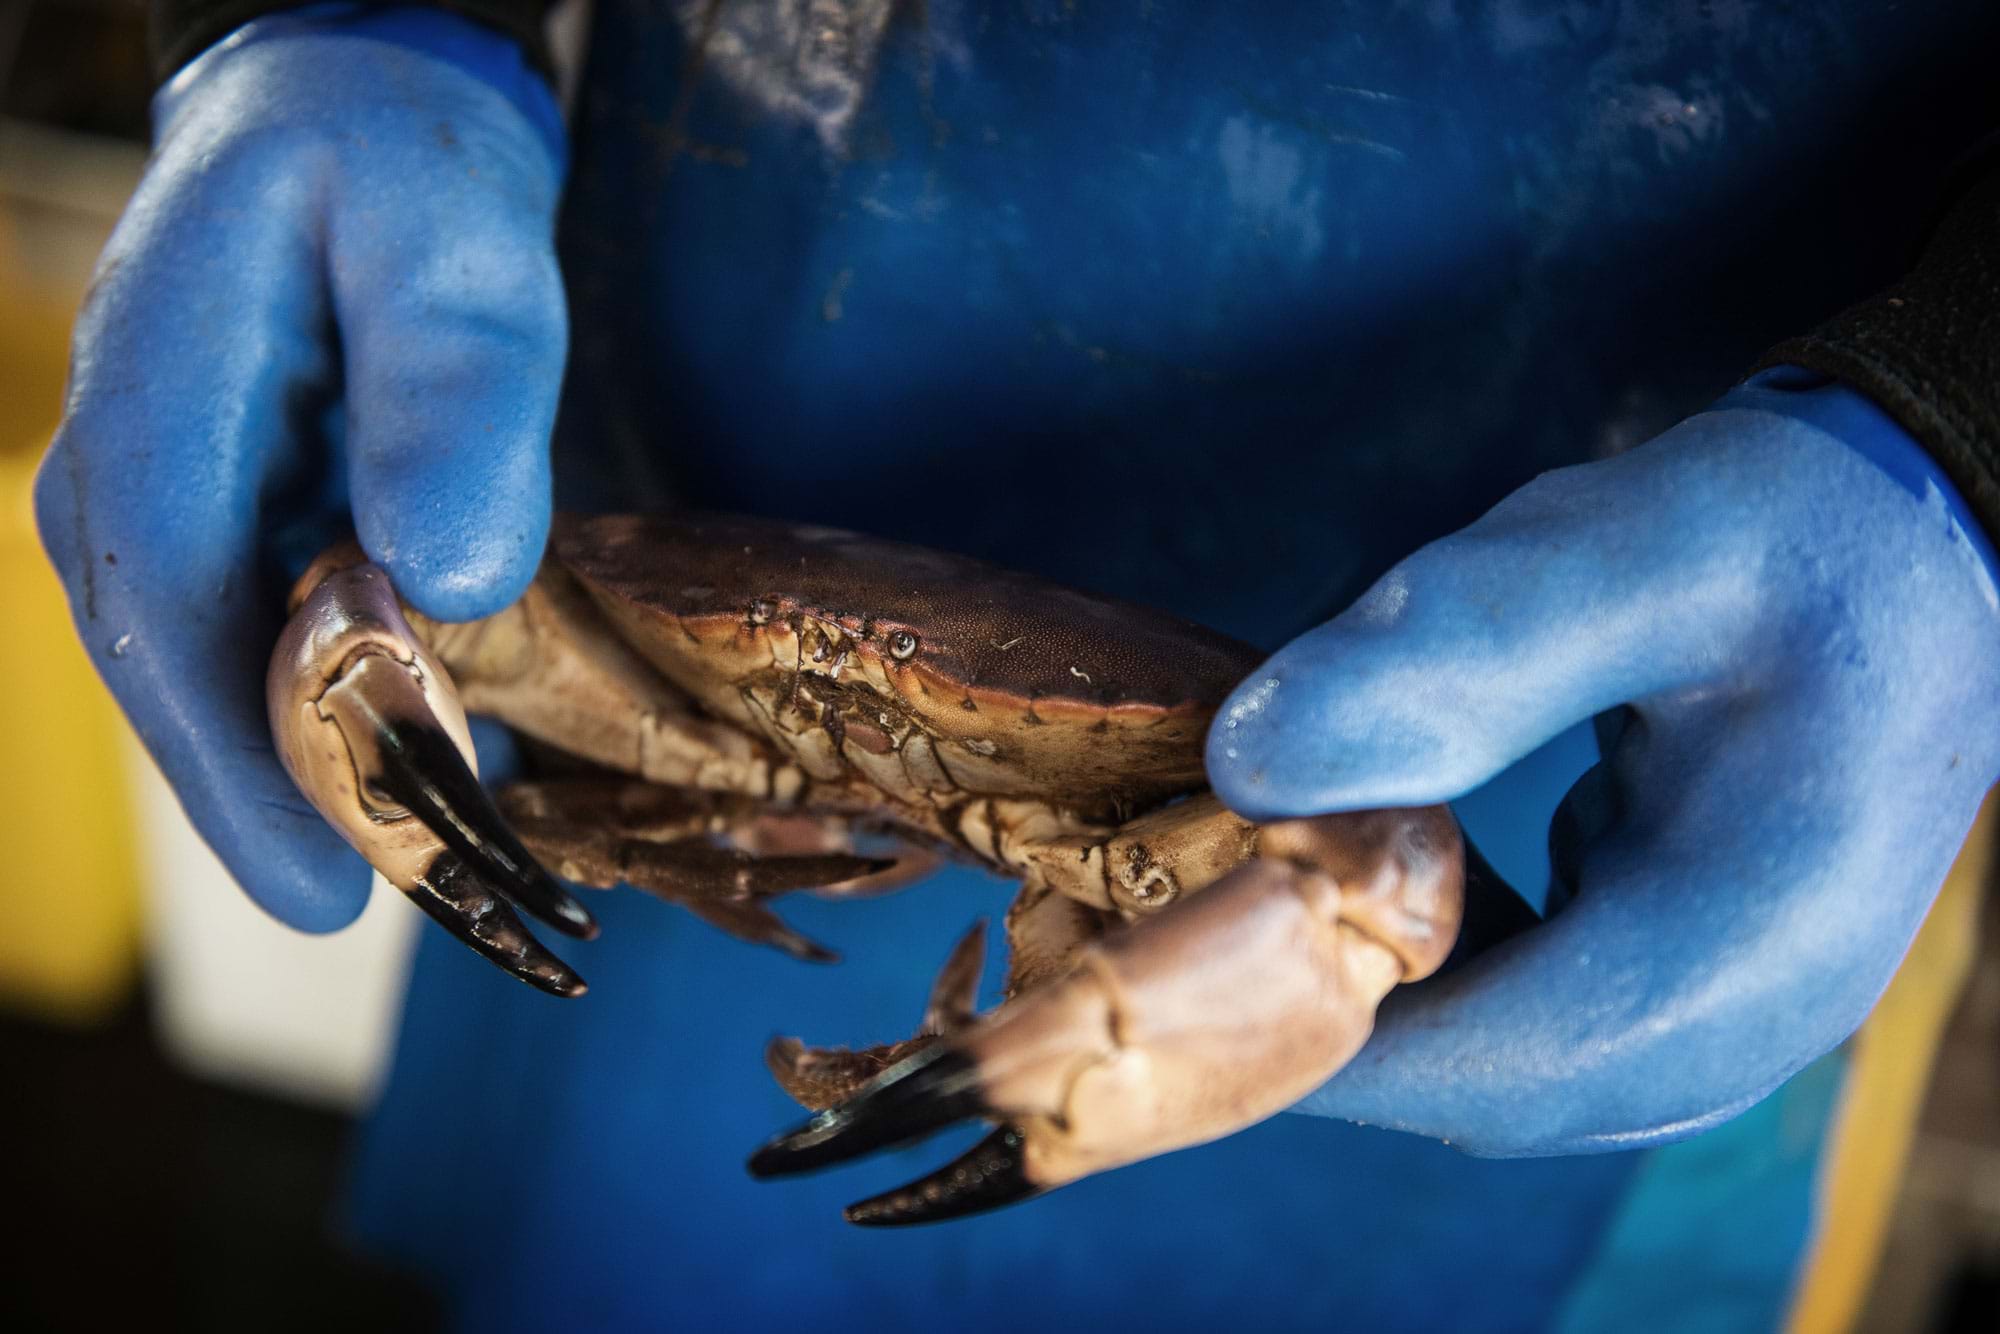 Photo of crab being held by person wearing gloves